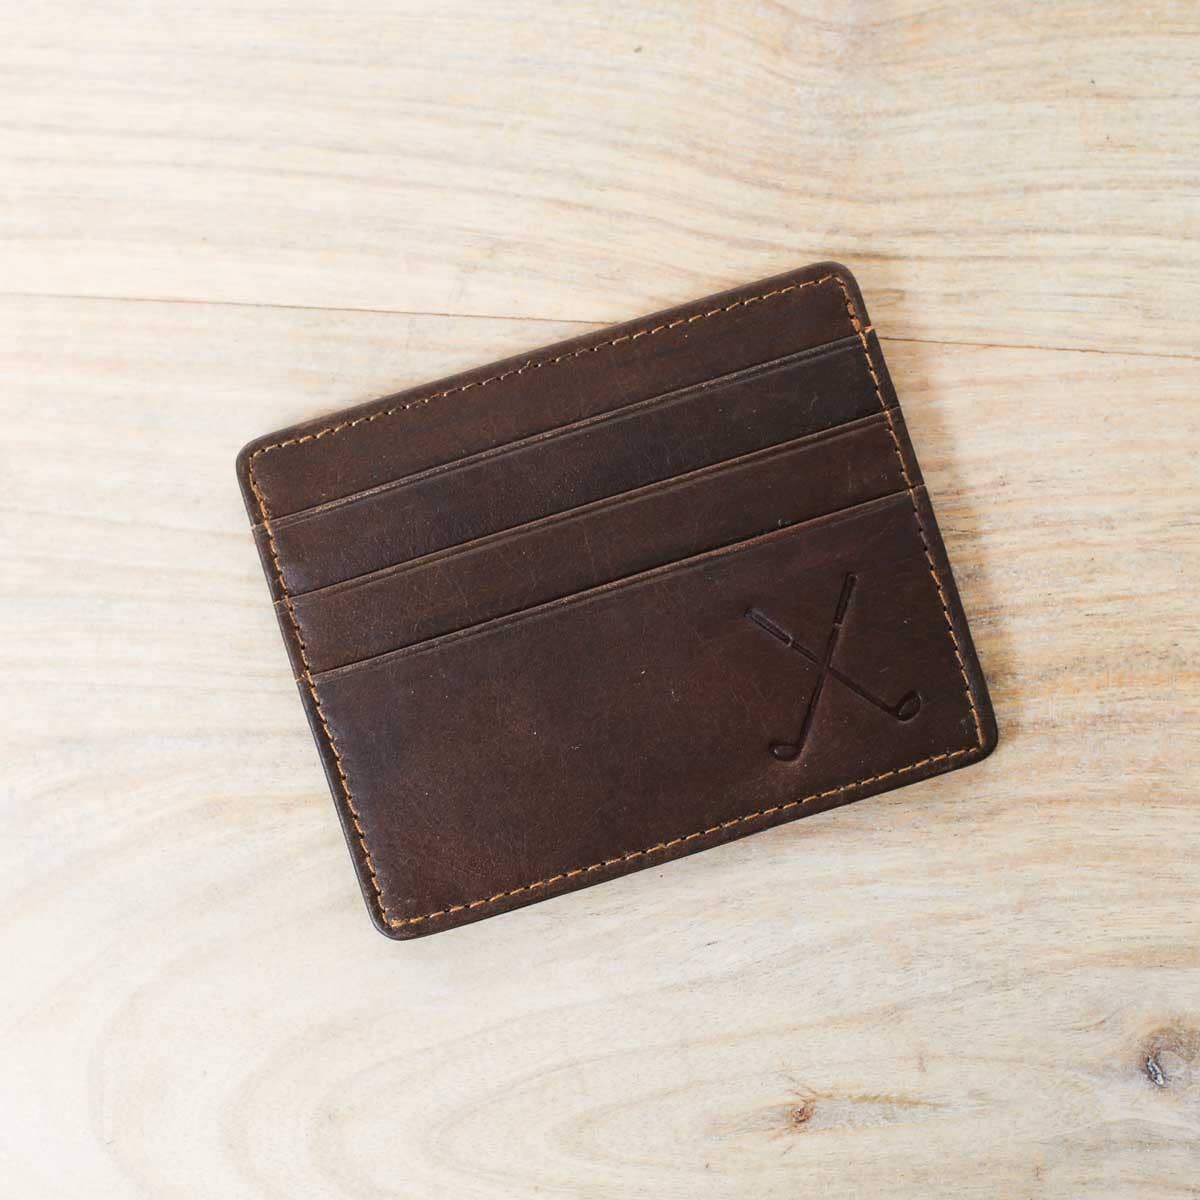 A Golf Leather Embossed Slim Wallet in Dark Brown from The Royal Standard sitting on top of a wooden table.